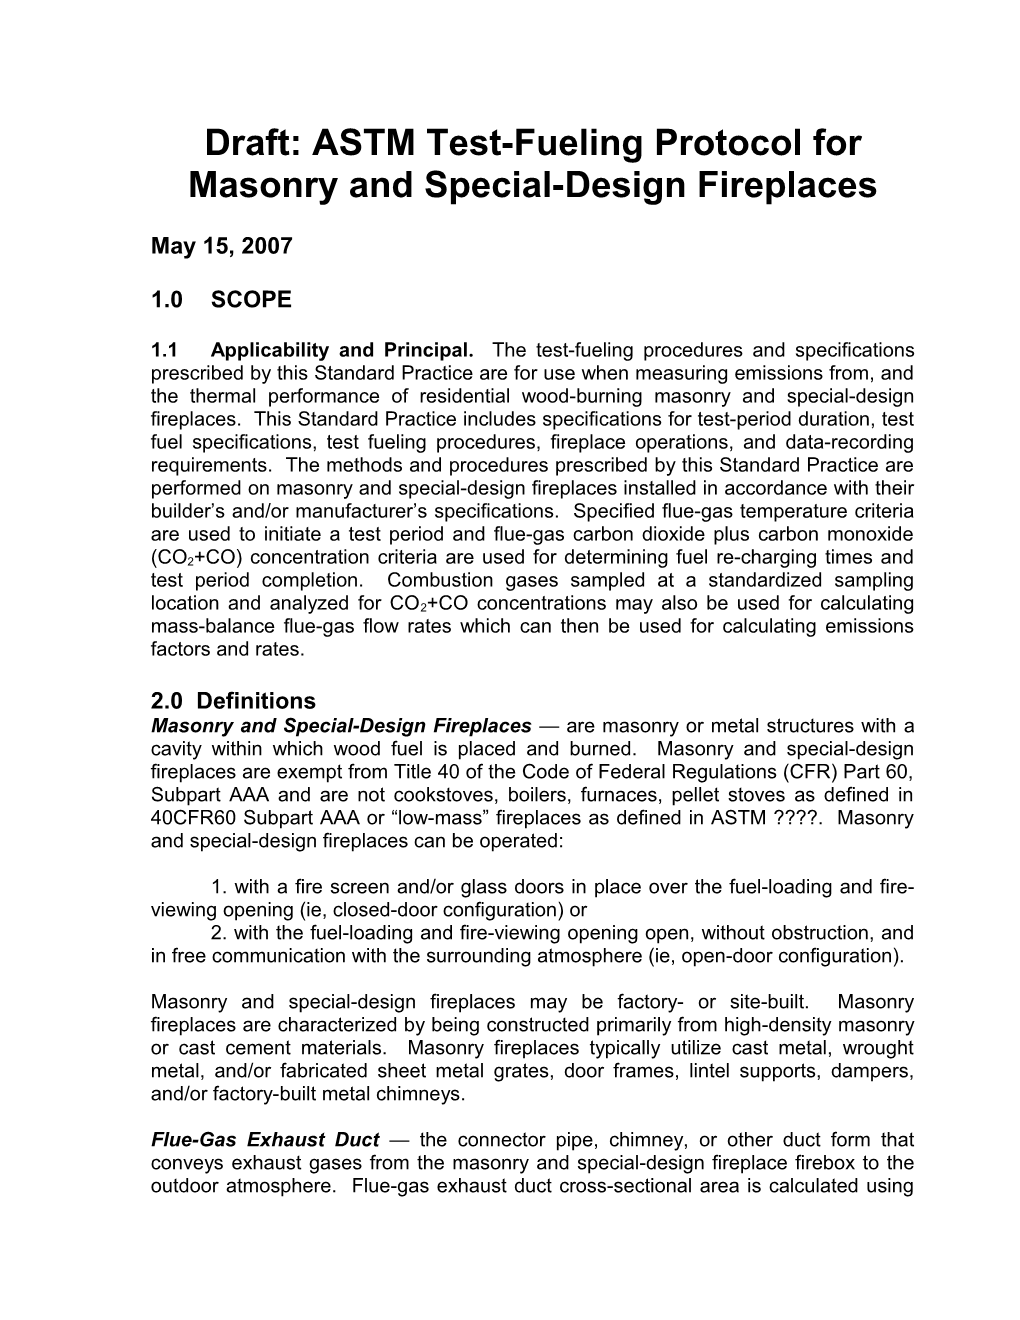 Draft: ASTM Test-Fueling Protocol for Masonry and Special-Design Fireplaces